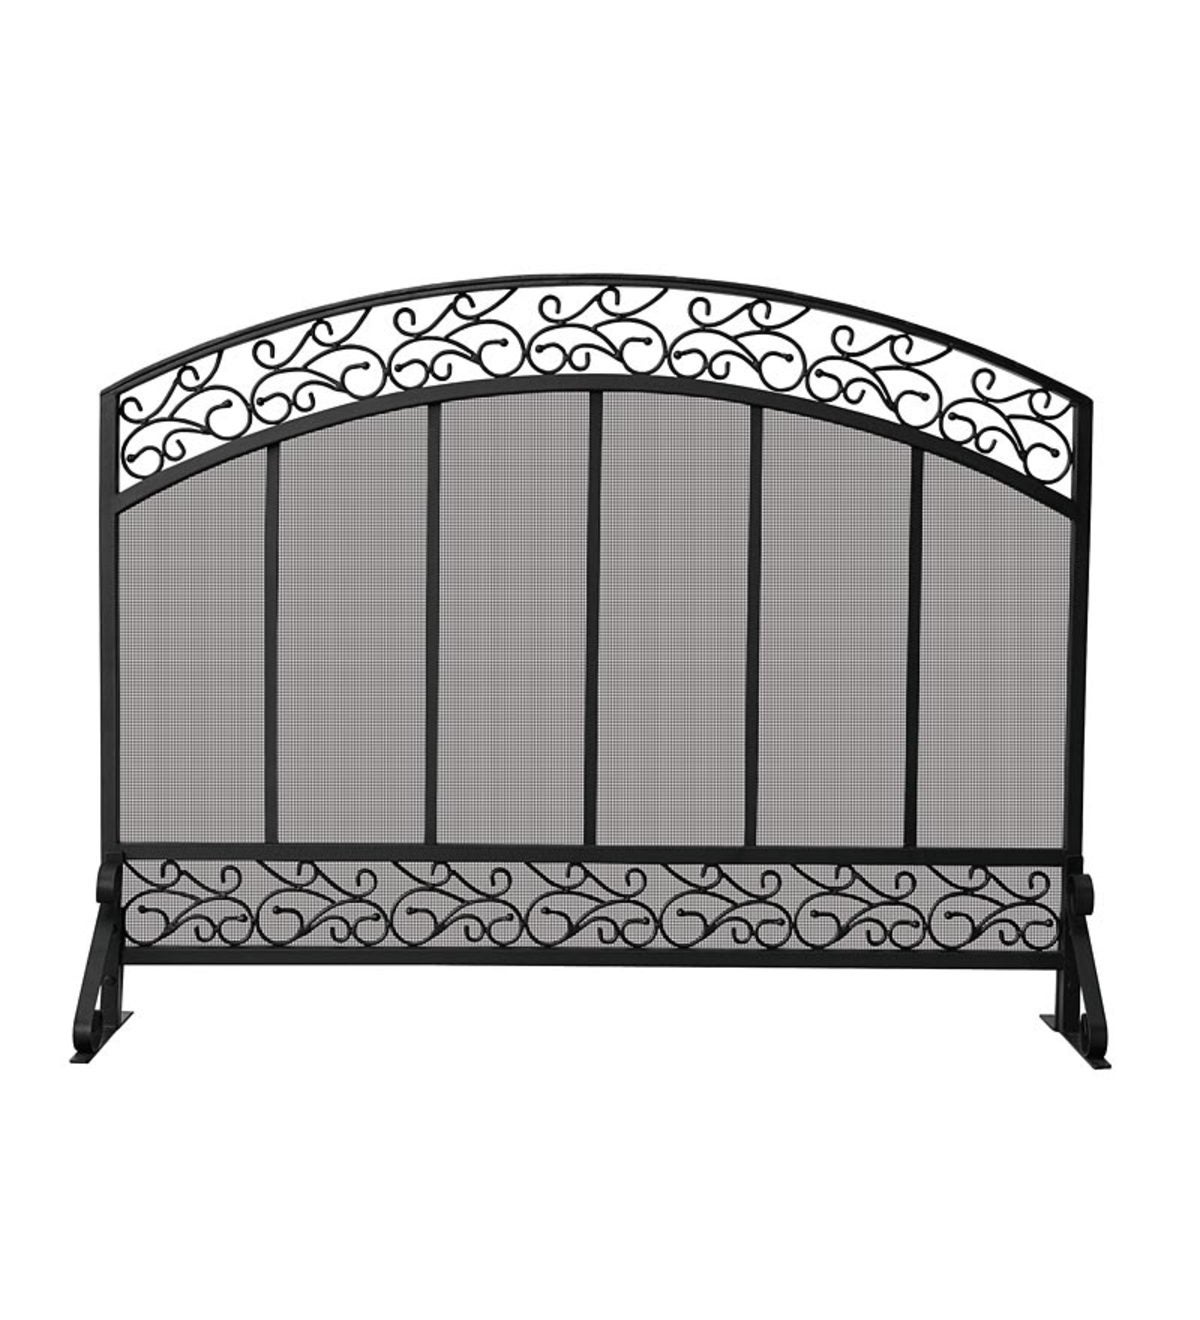 Black Wrought Iron Single Panel Fireplace Screen with Hammered Copper-Top Trim